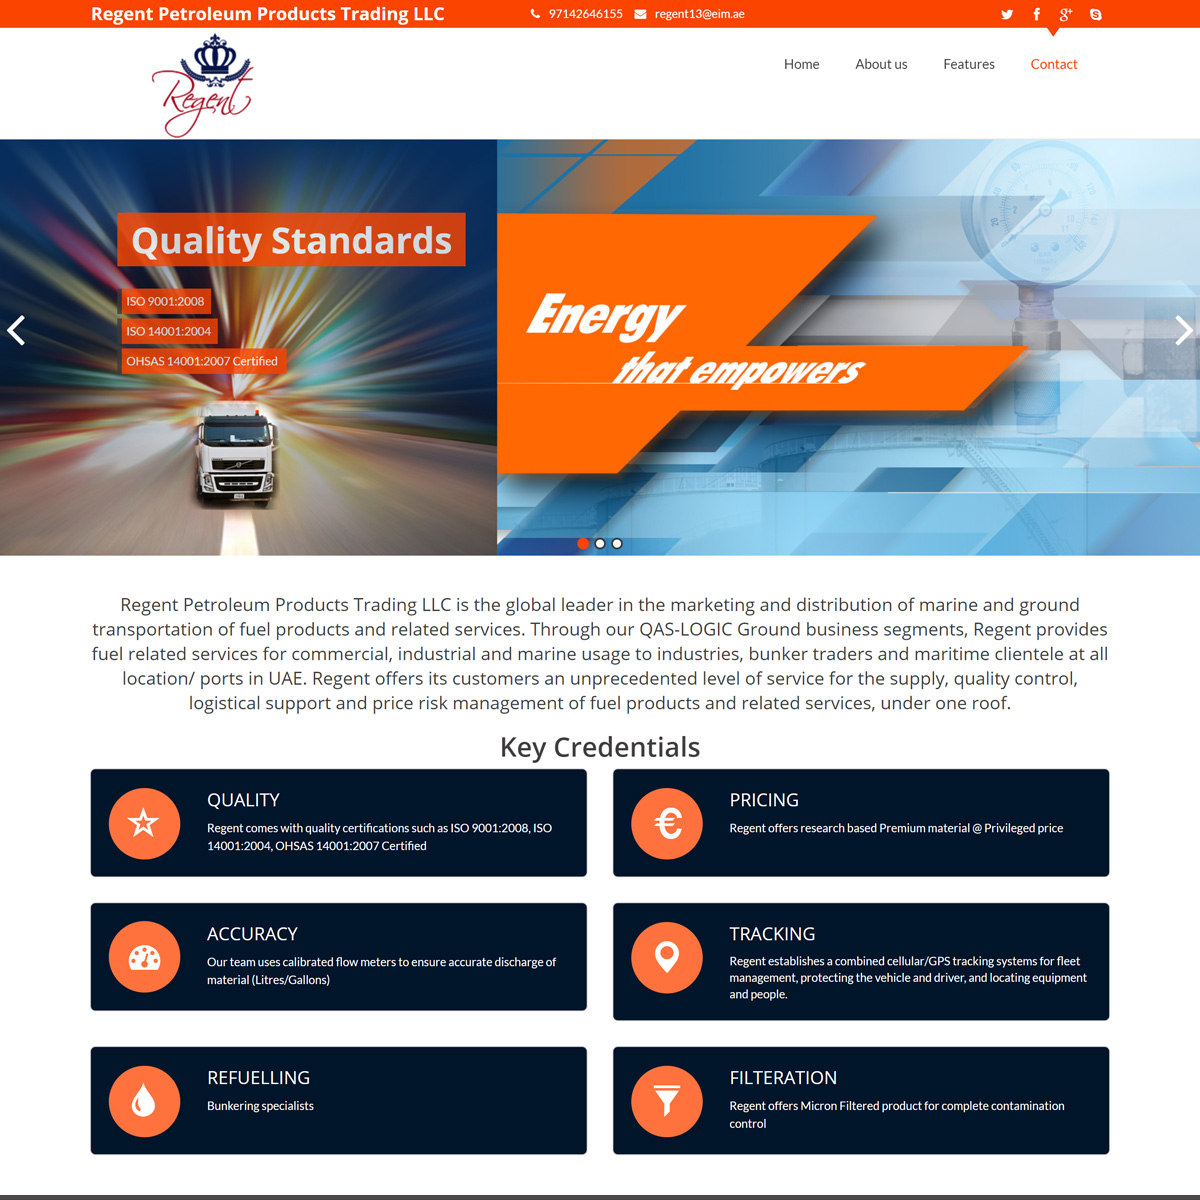 Creative Interface For Mobile Ready Website Designed For Petroleum Industry Based in Dubai - UAE